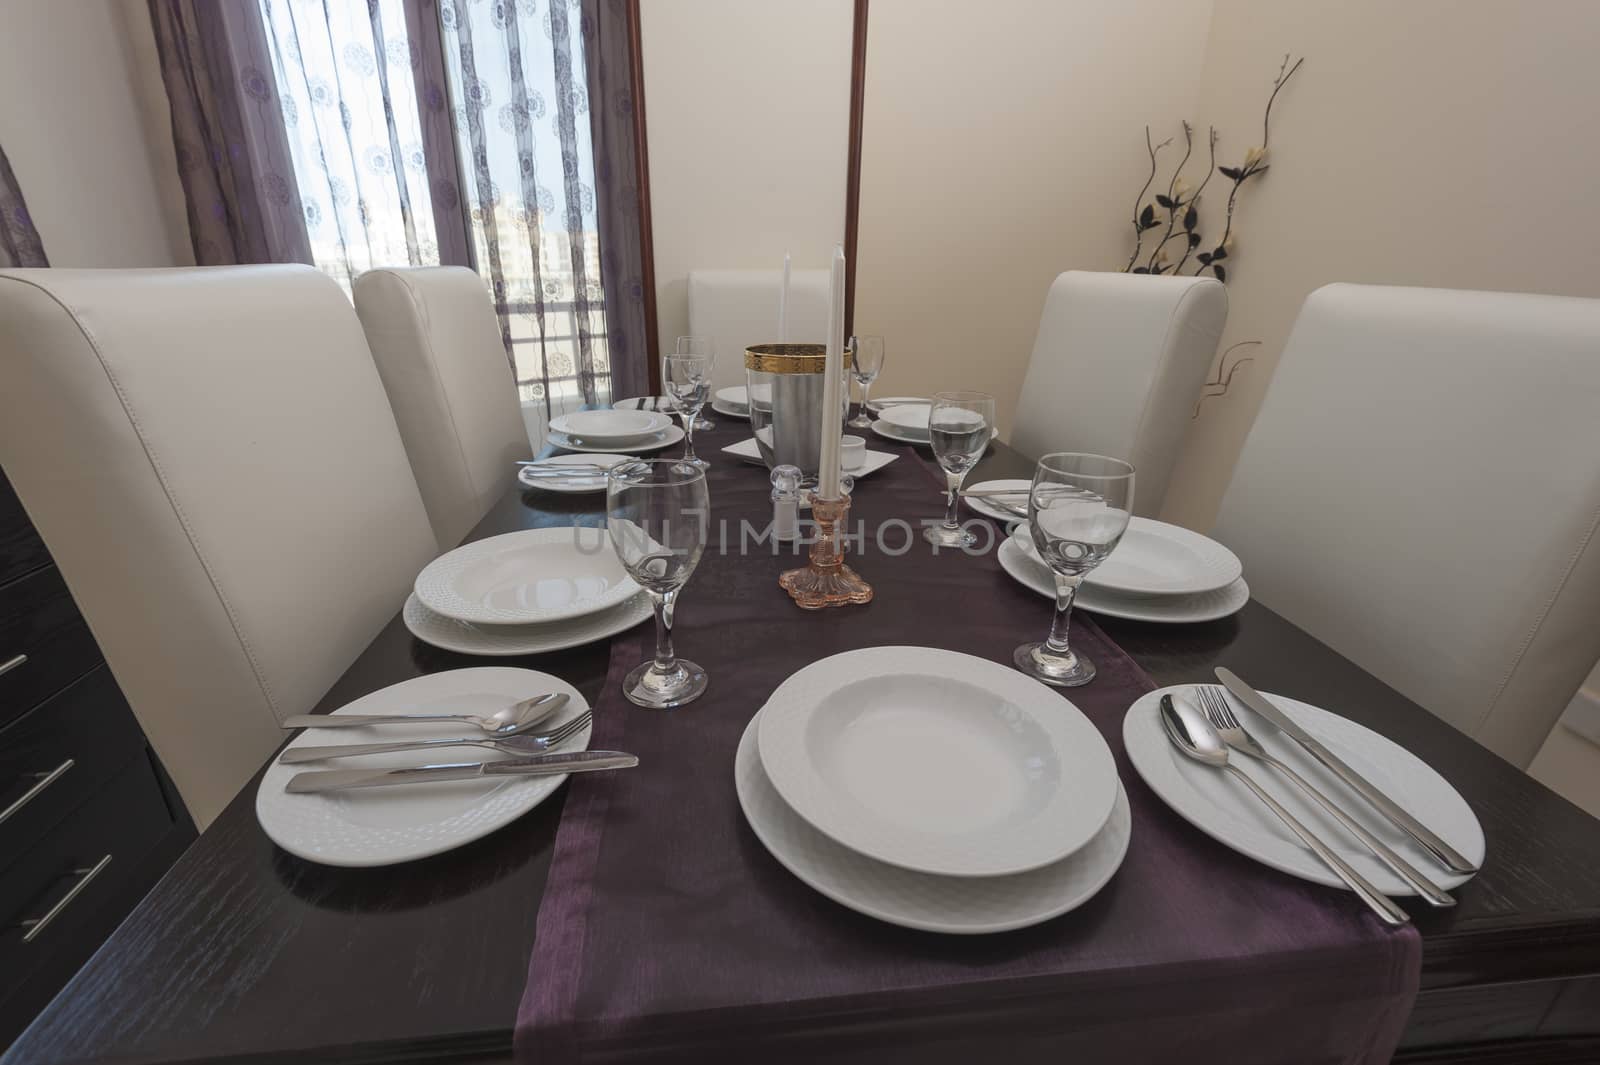 Dining room with table and settings in a luxury apartment